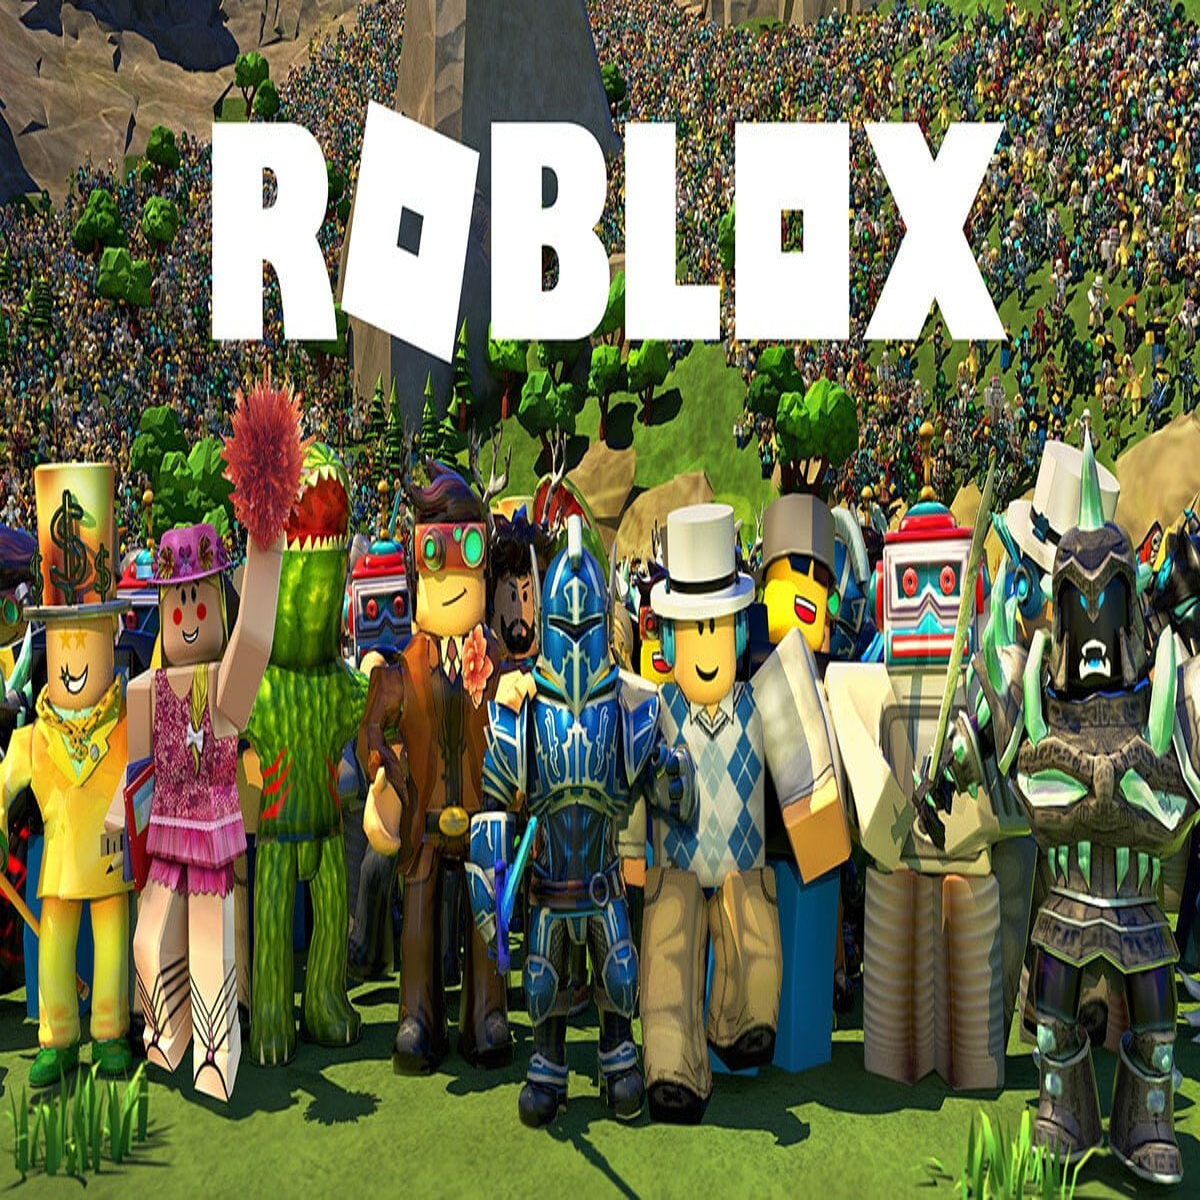 5 best Roblox games to play with friends